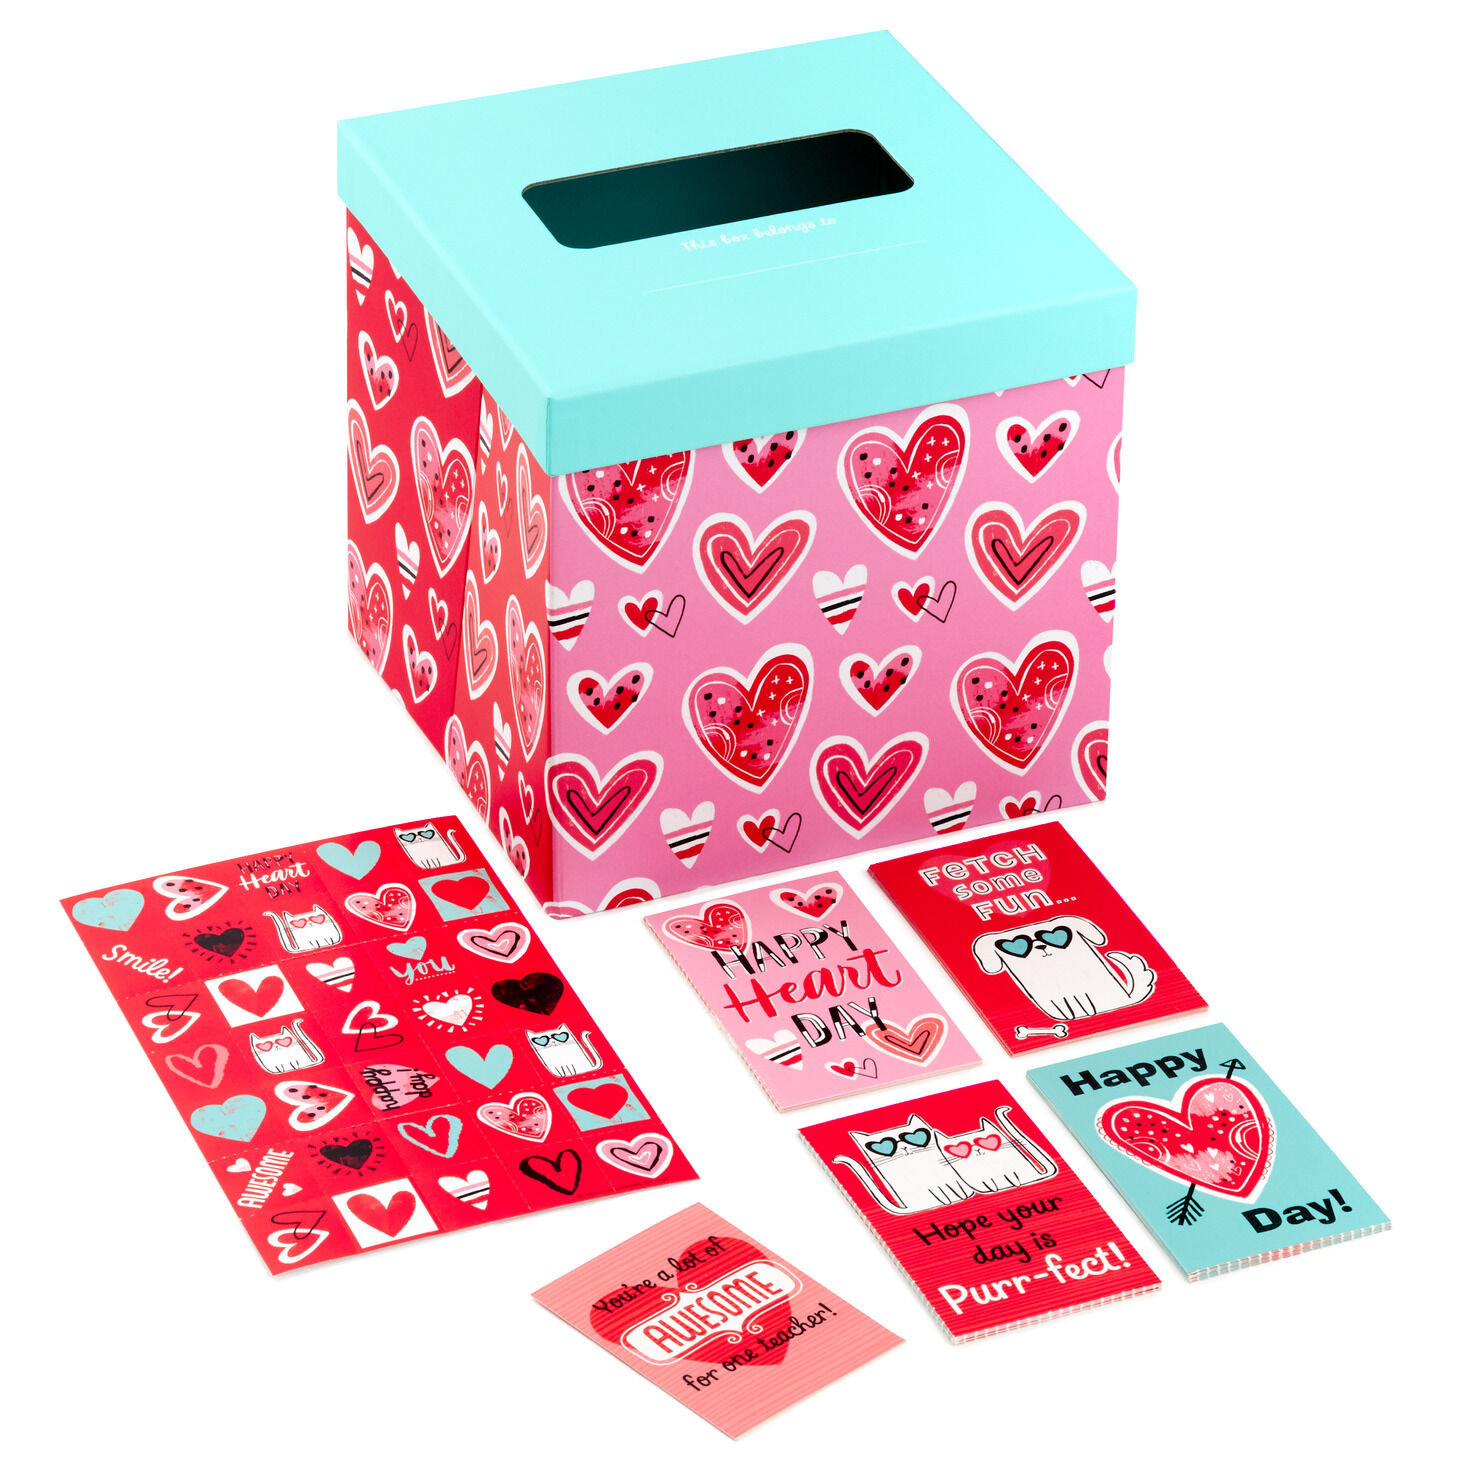 Hallmark Kids Valentines Day Cards and Stickers Assortment Puppies and Kittens 24 Cards with Envelopes 